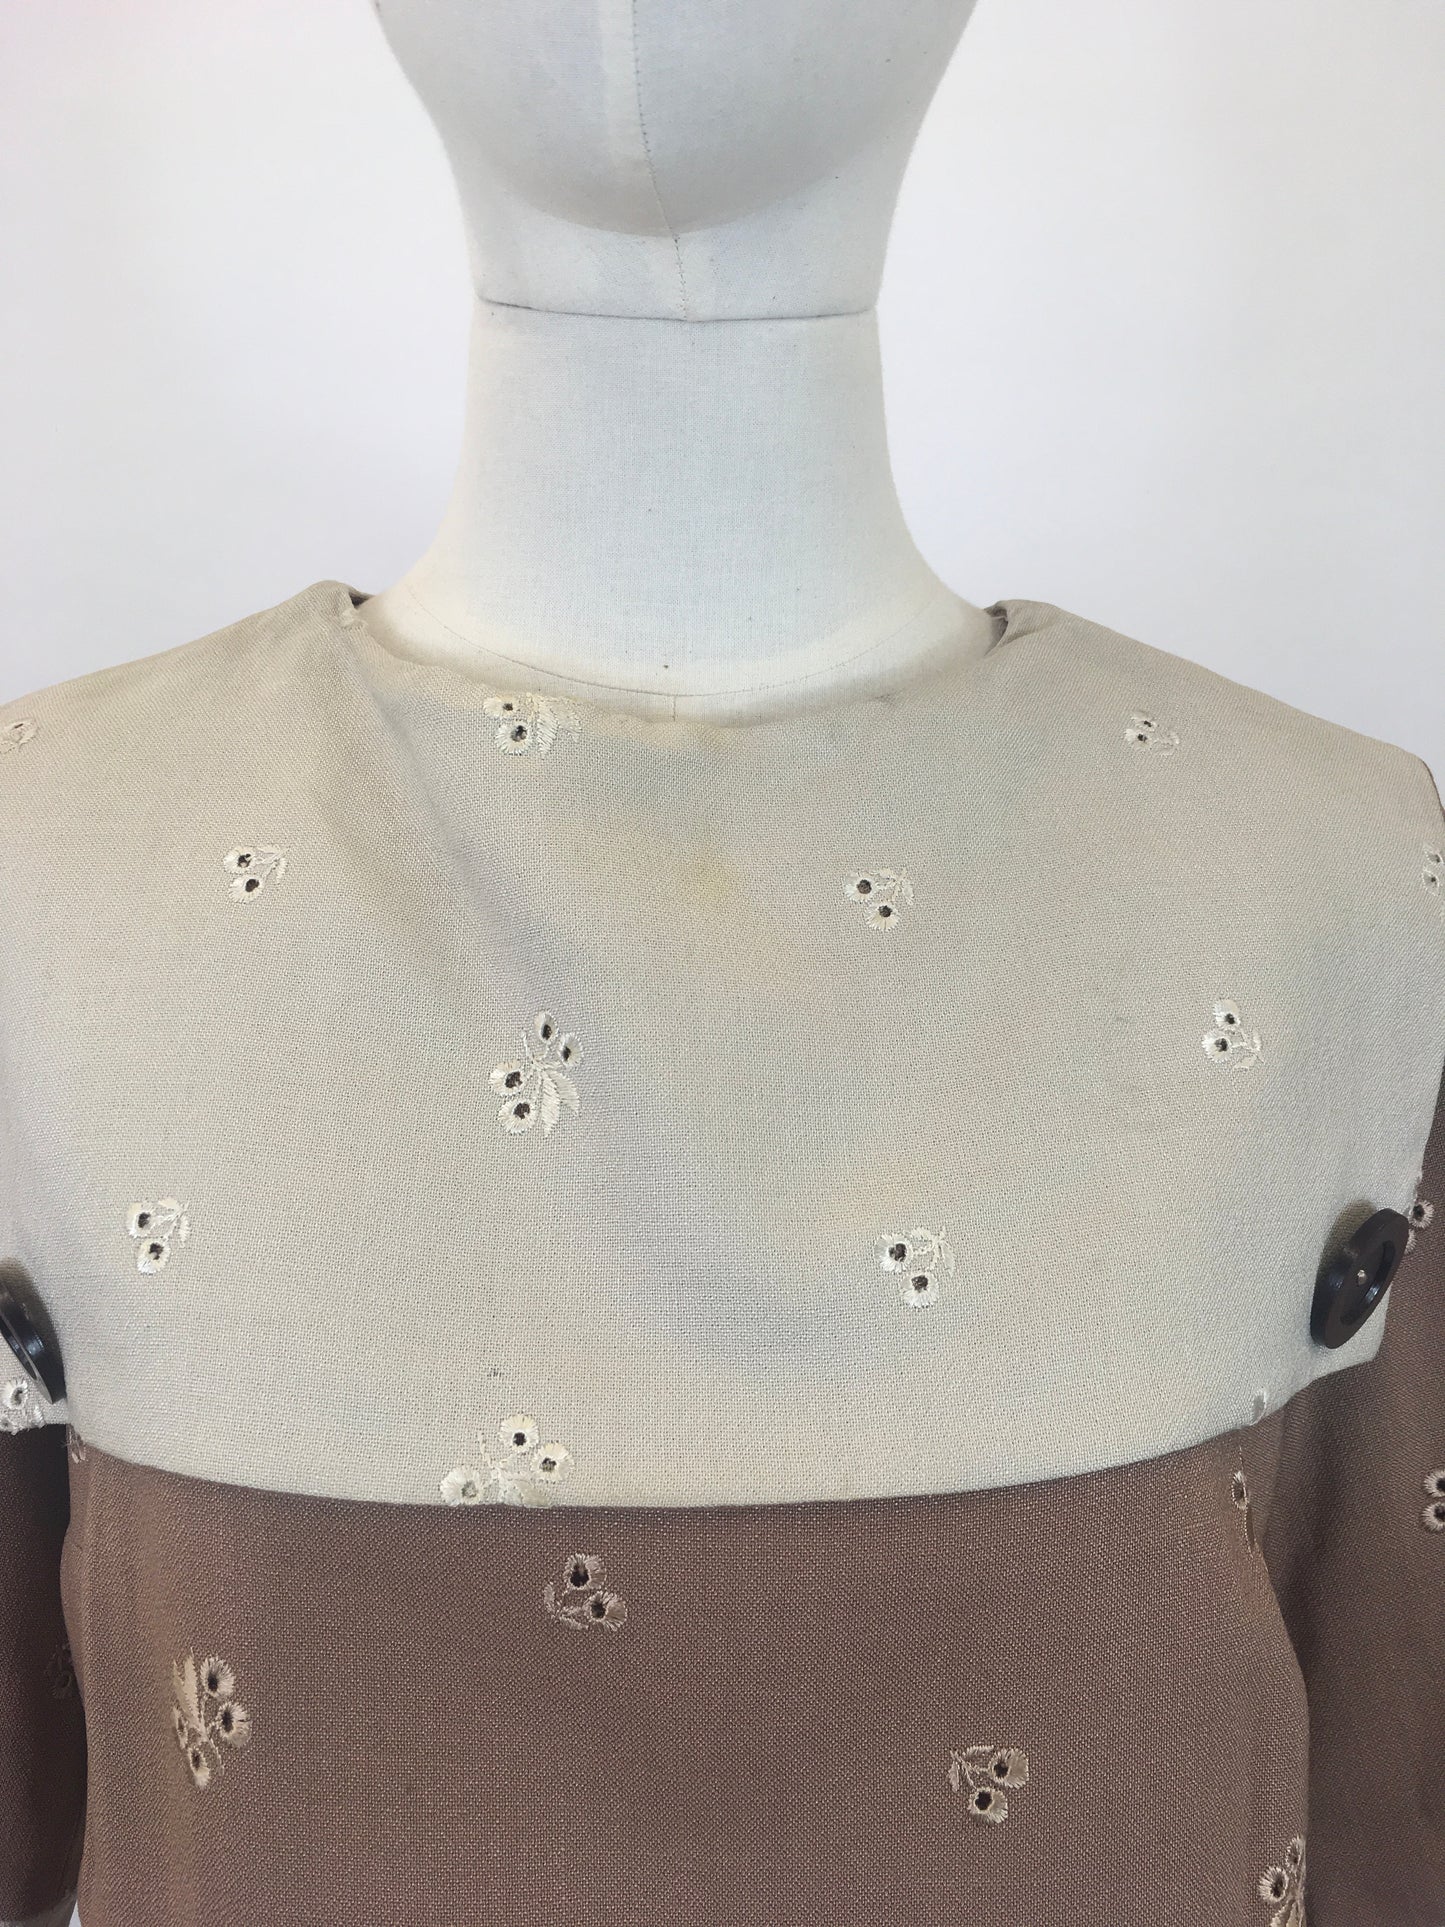 Original early 50’s Broderie Anglaise dress - in a Brown /Fawn colour combination.